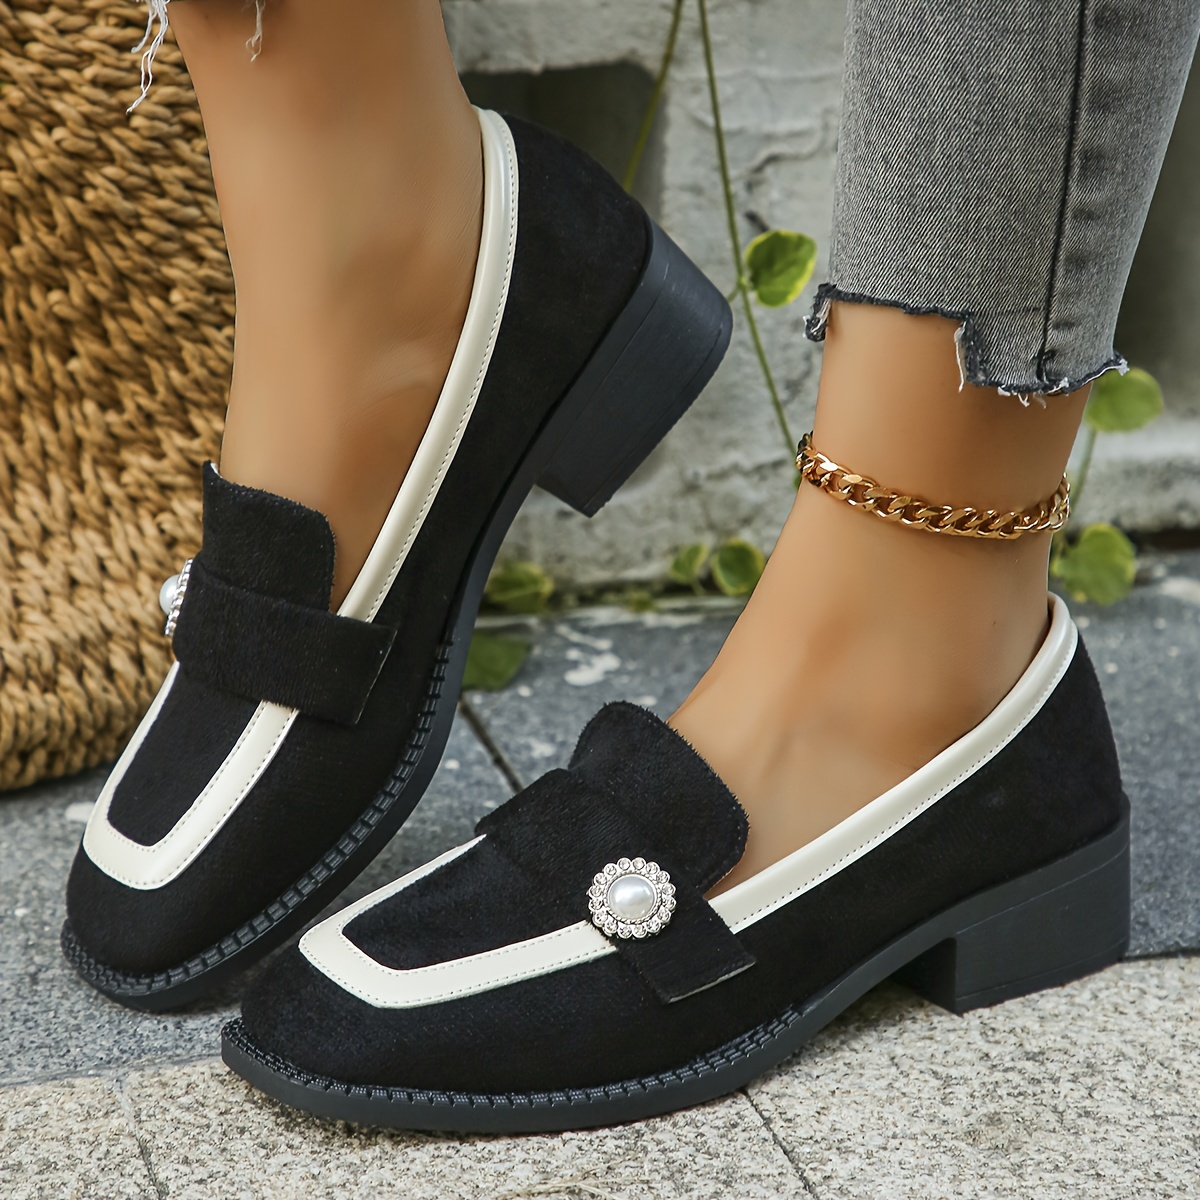 women s contrast color chunky low heel shoes elegant